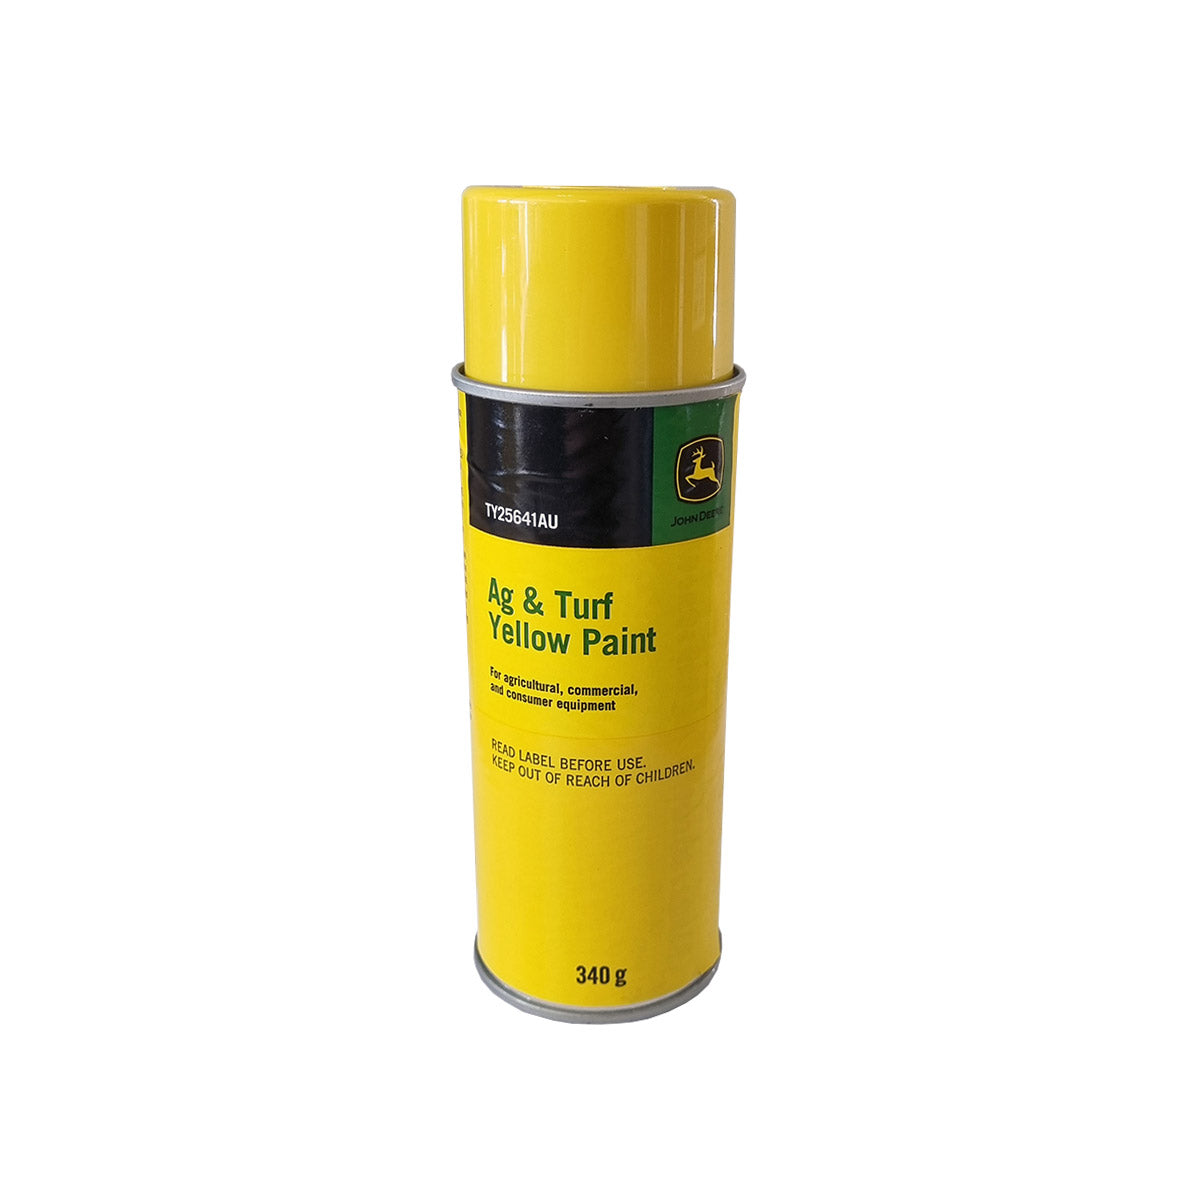 John Deere Ag and Turf Yellow Paint - 340g Spray Can